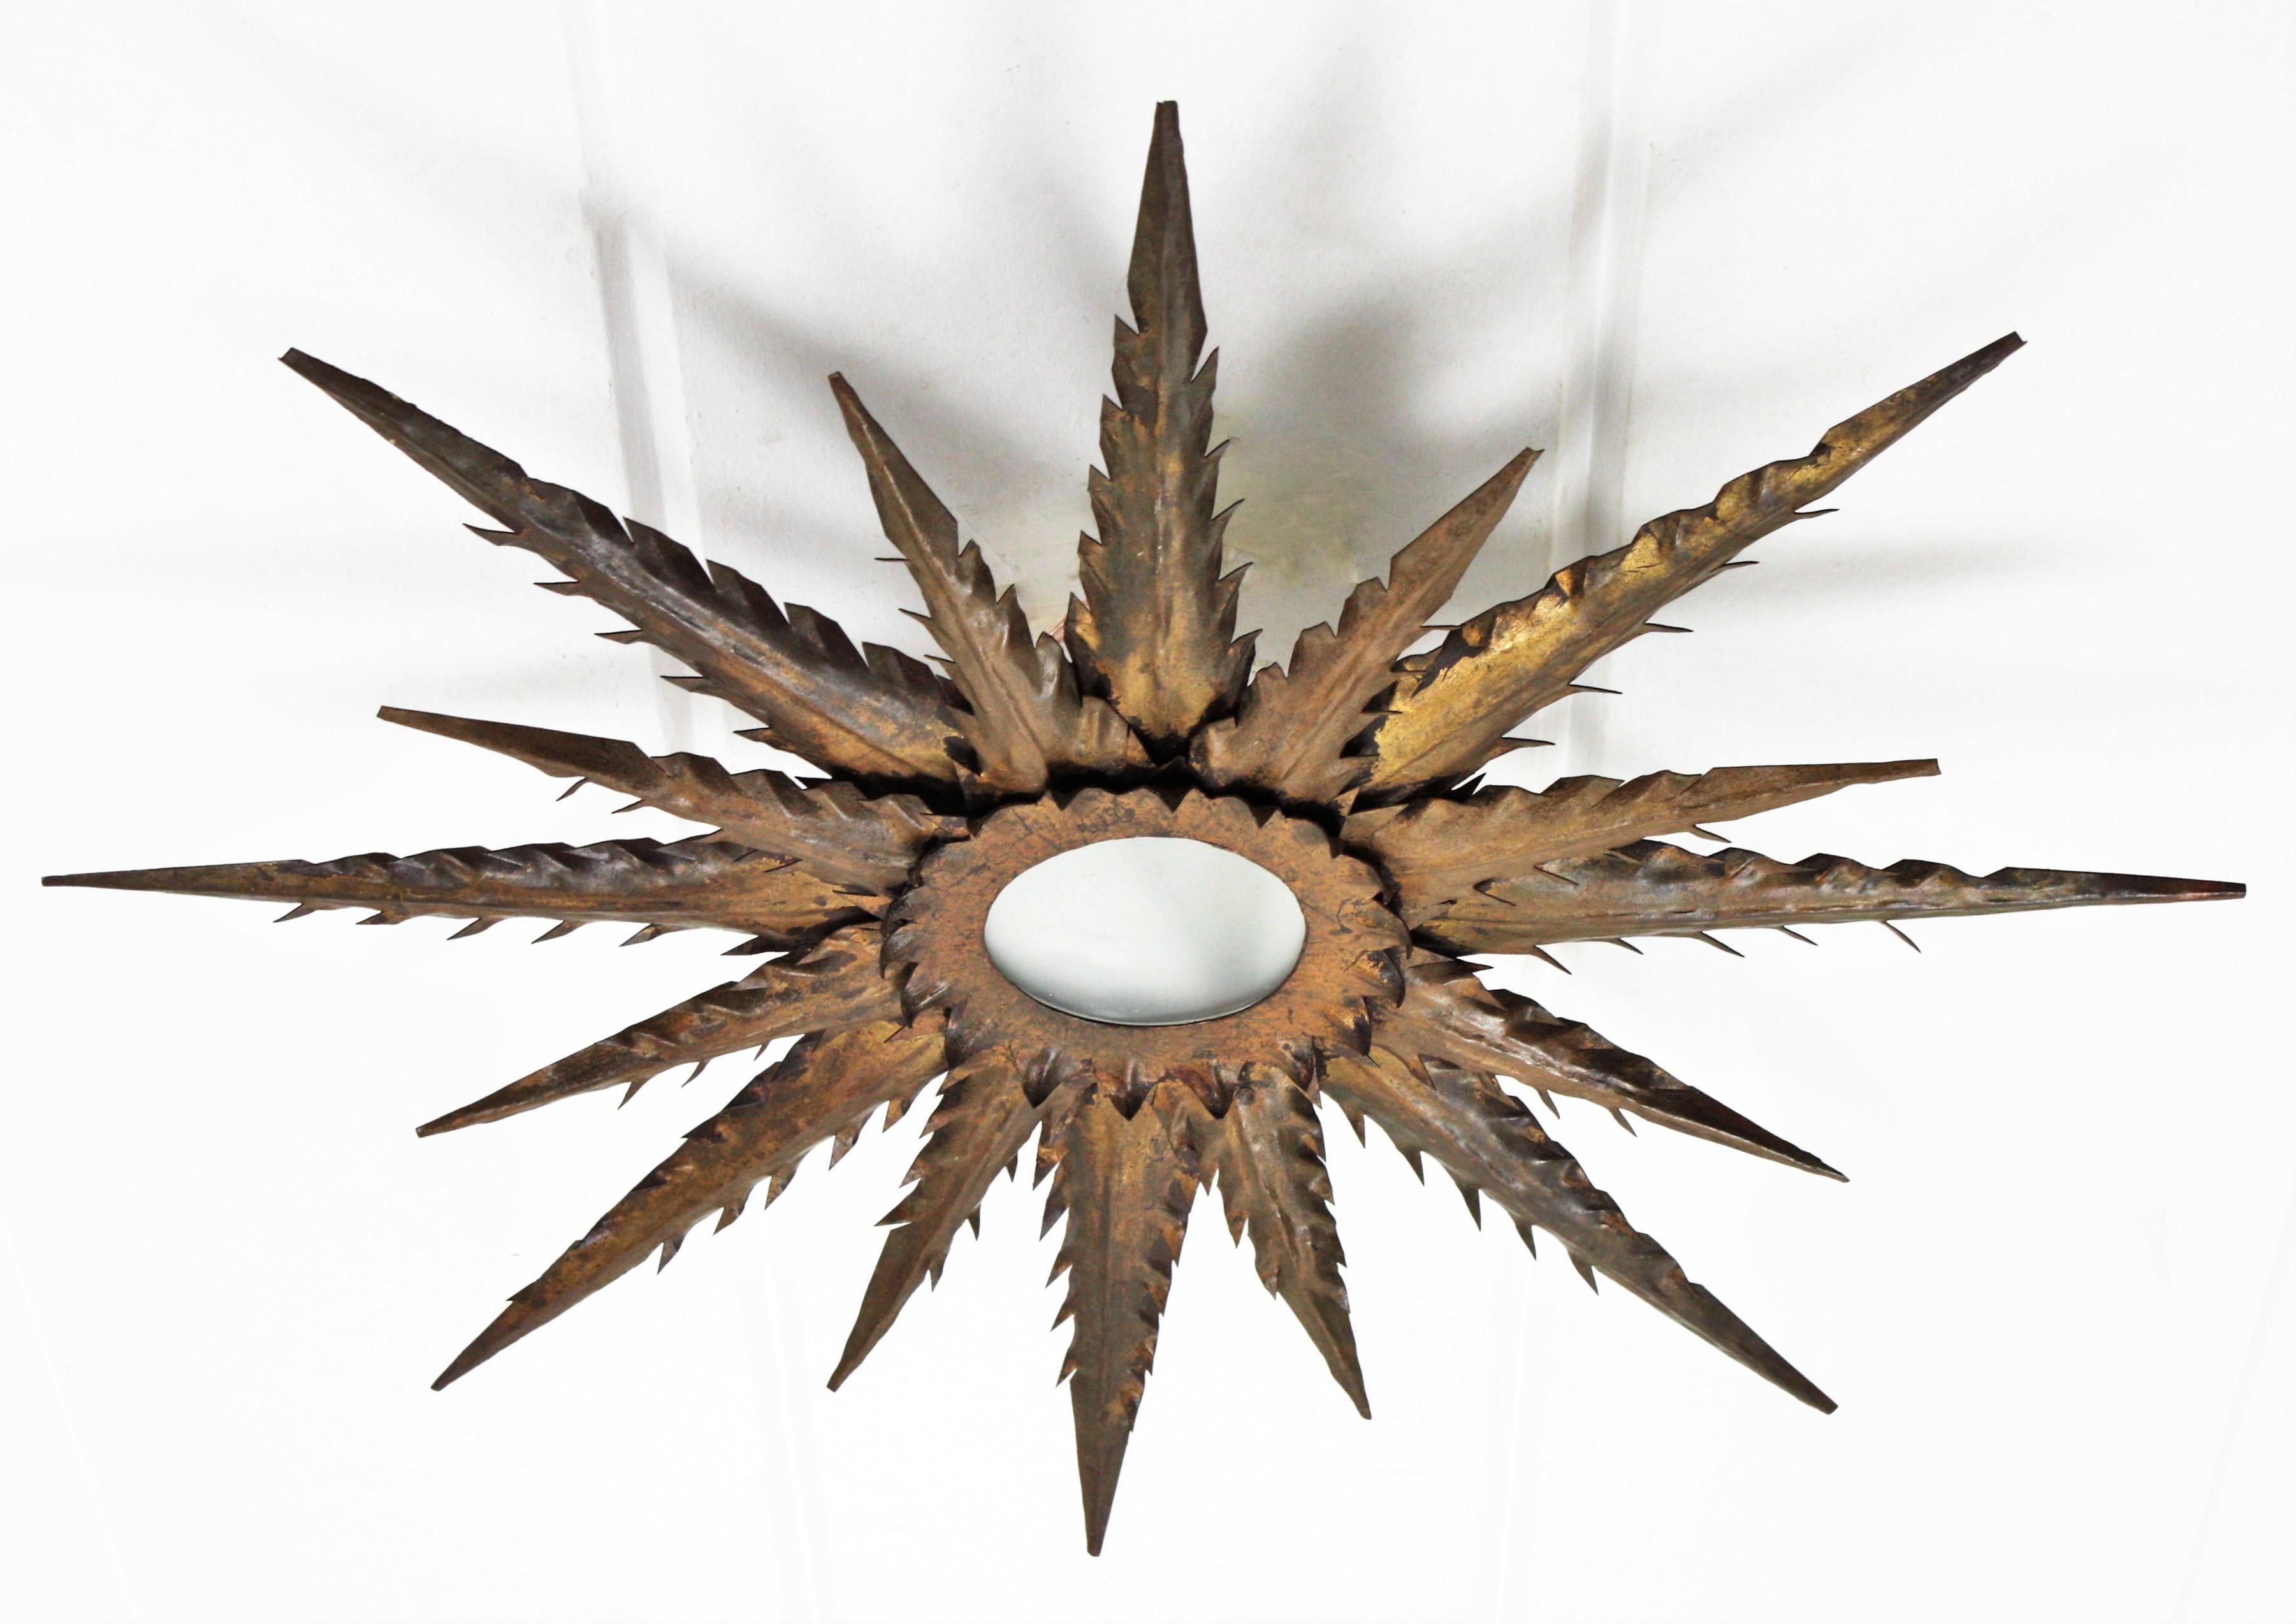 Rare handcrafted parcel-gilt iron sunburst / starburst shaped flush mount with frosted glass, Spain, 1940s-1950s.
This Brutalist flush mount has two layers of rays in different sizes with jagged pointed edges. It has a terrific aged patina with